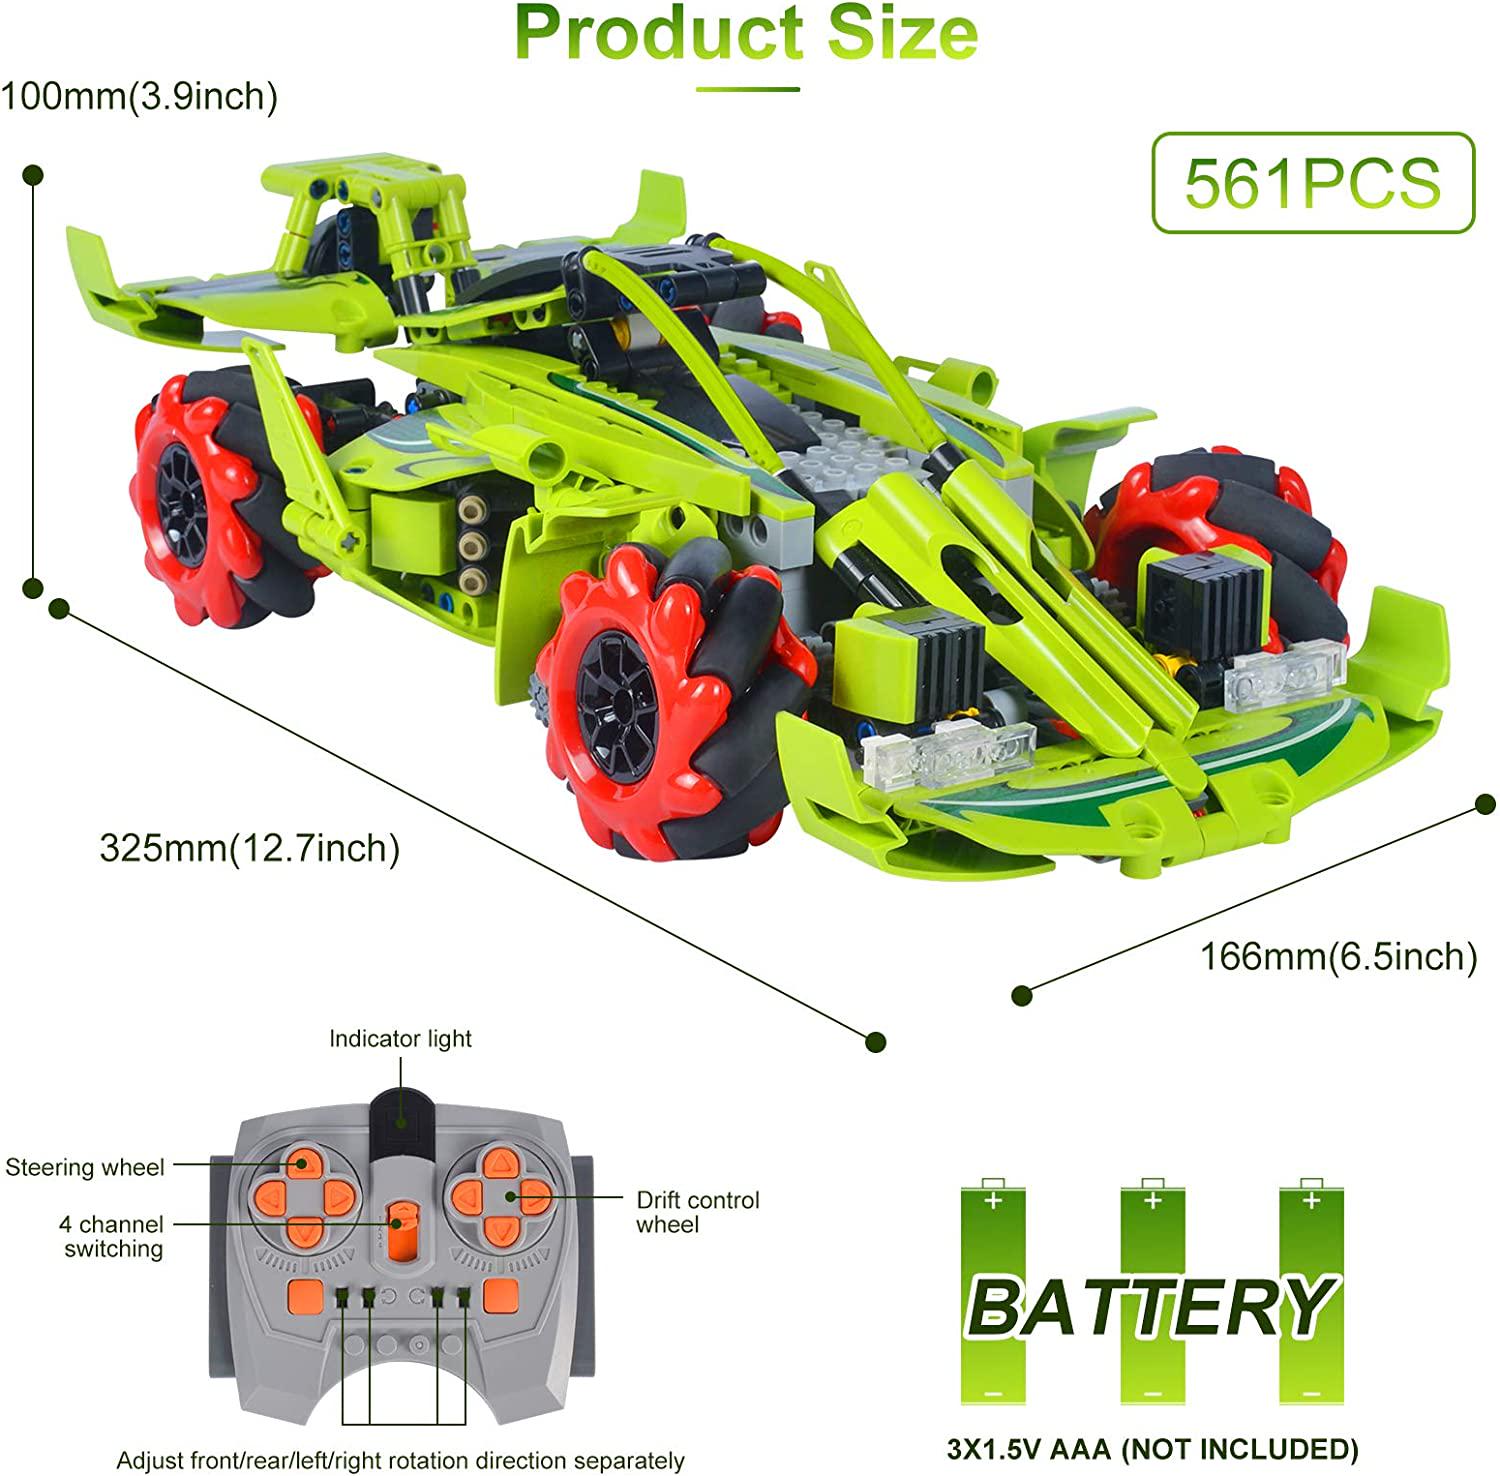 GRESAHOM, GRESAHOM Remote Control Building Kit,Programmable Engineering Learning Building Set 561PCS,360°Rotating Racing Car with 2.4Ghz App Controlled Stunt 4x4 Car for Kids 6+Year Old